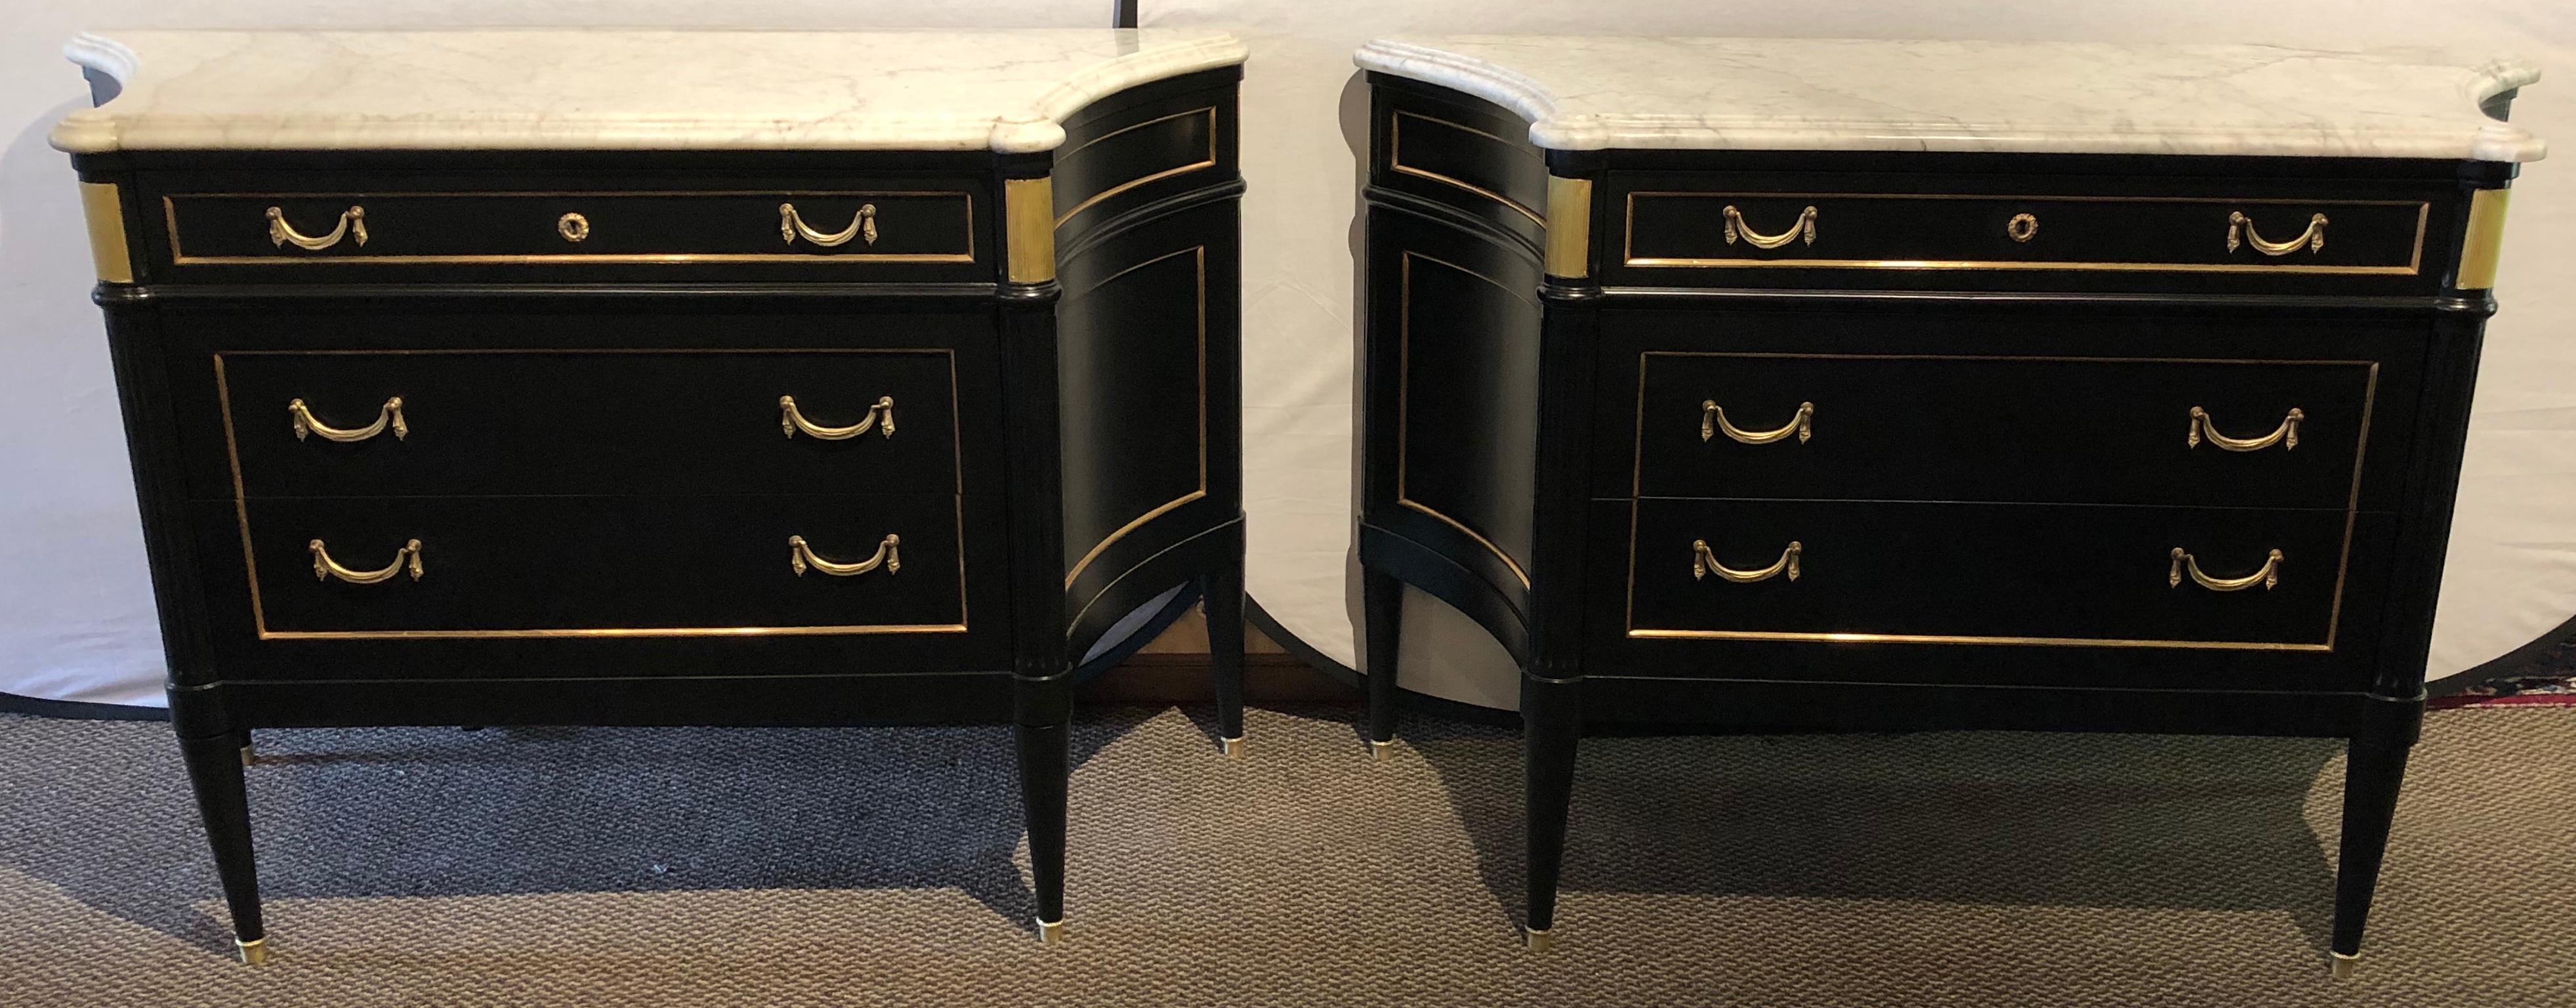 Pair of concave side large and impressive commodes, chests or nightstands in an ebony finish with marble tops and bronze mounts, attributed to Maison Jansen. Each of this stunning commodes support a thick white and gray veined marble top with